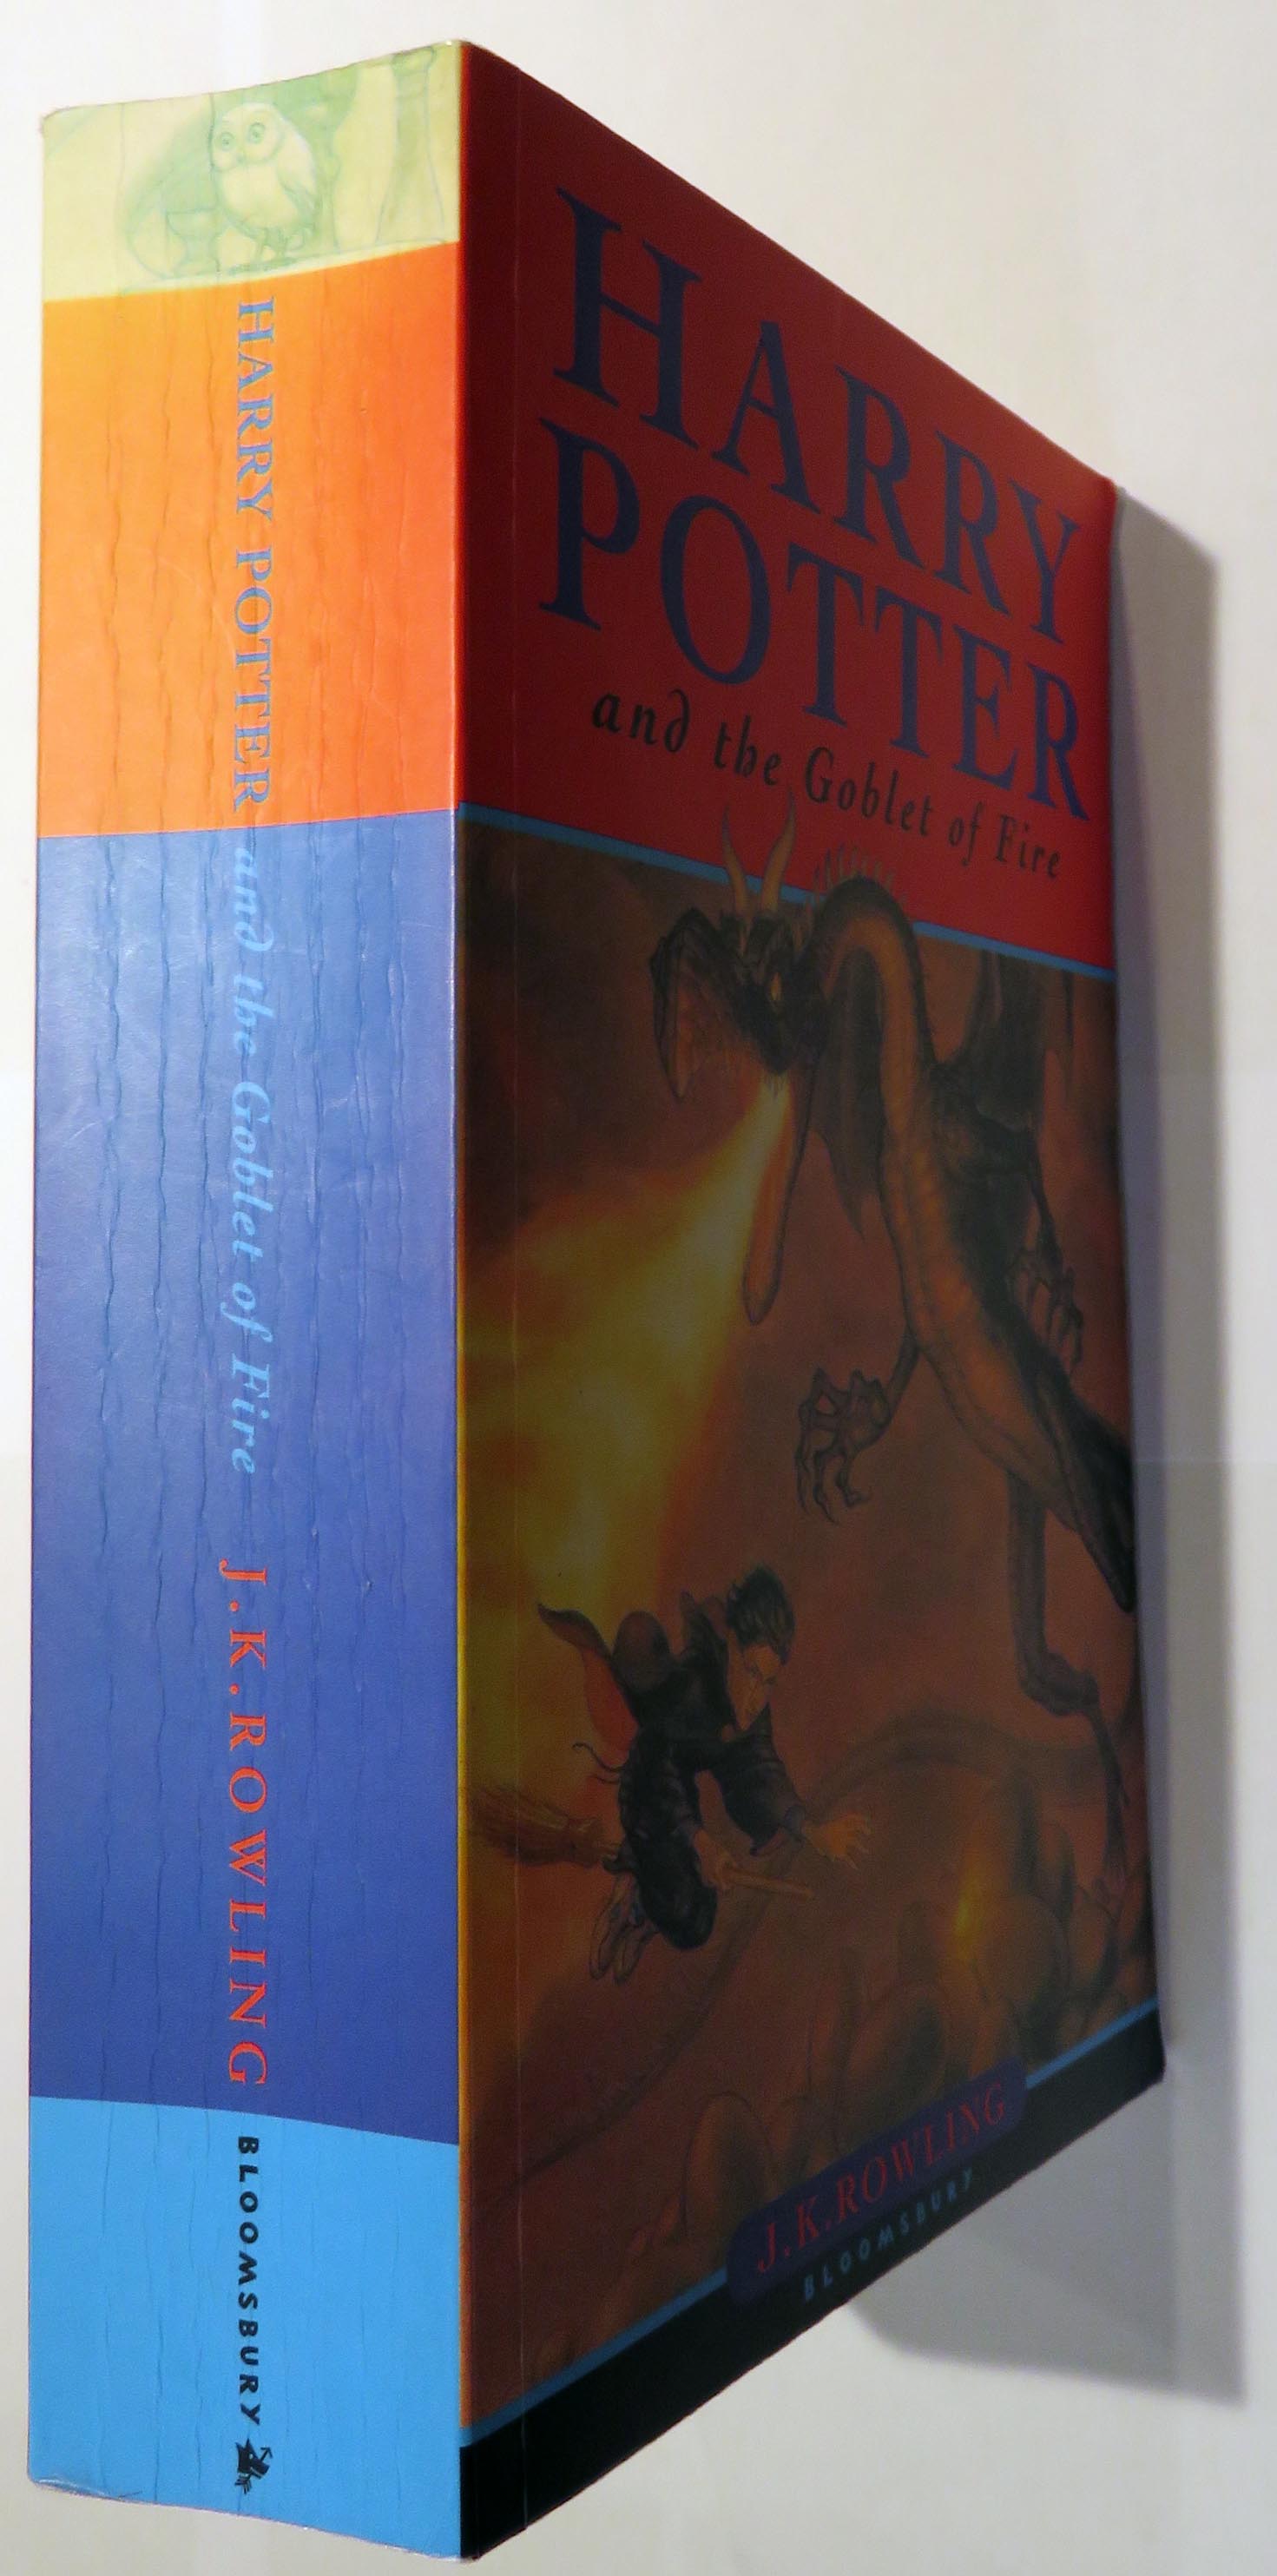 Harry Potter and the Goblet of Fire First Edition paperback 